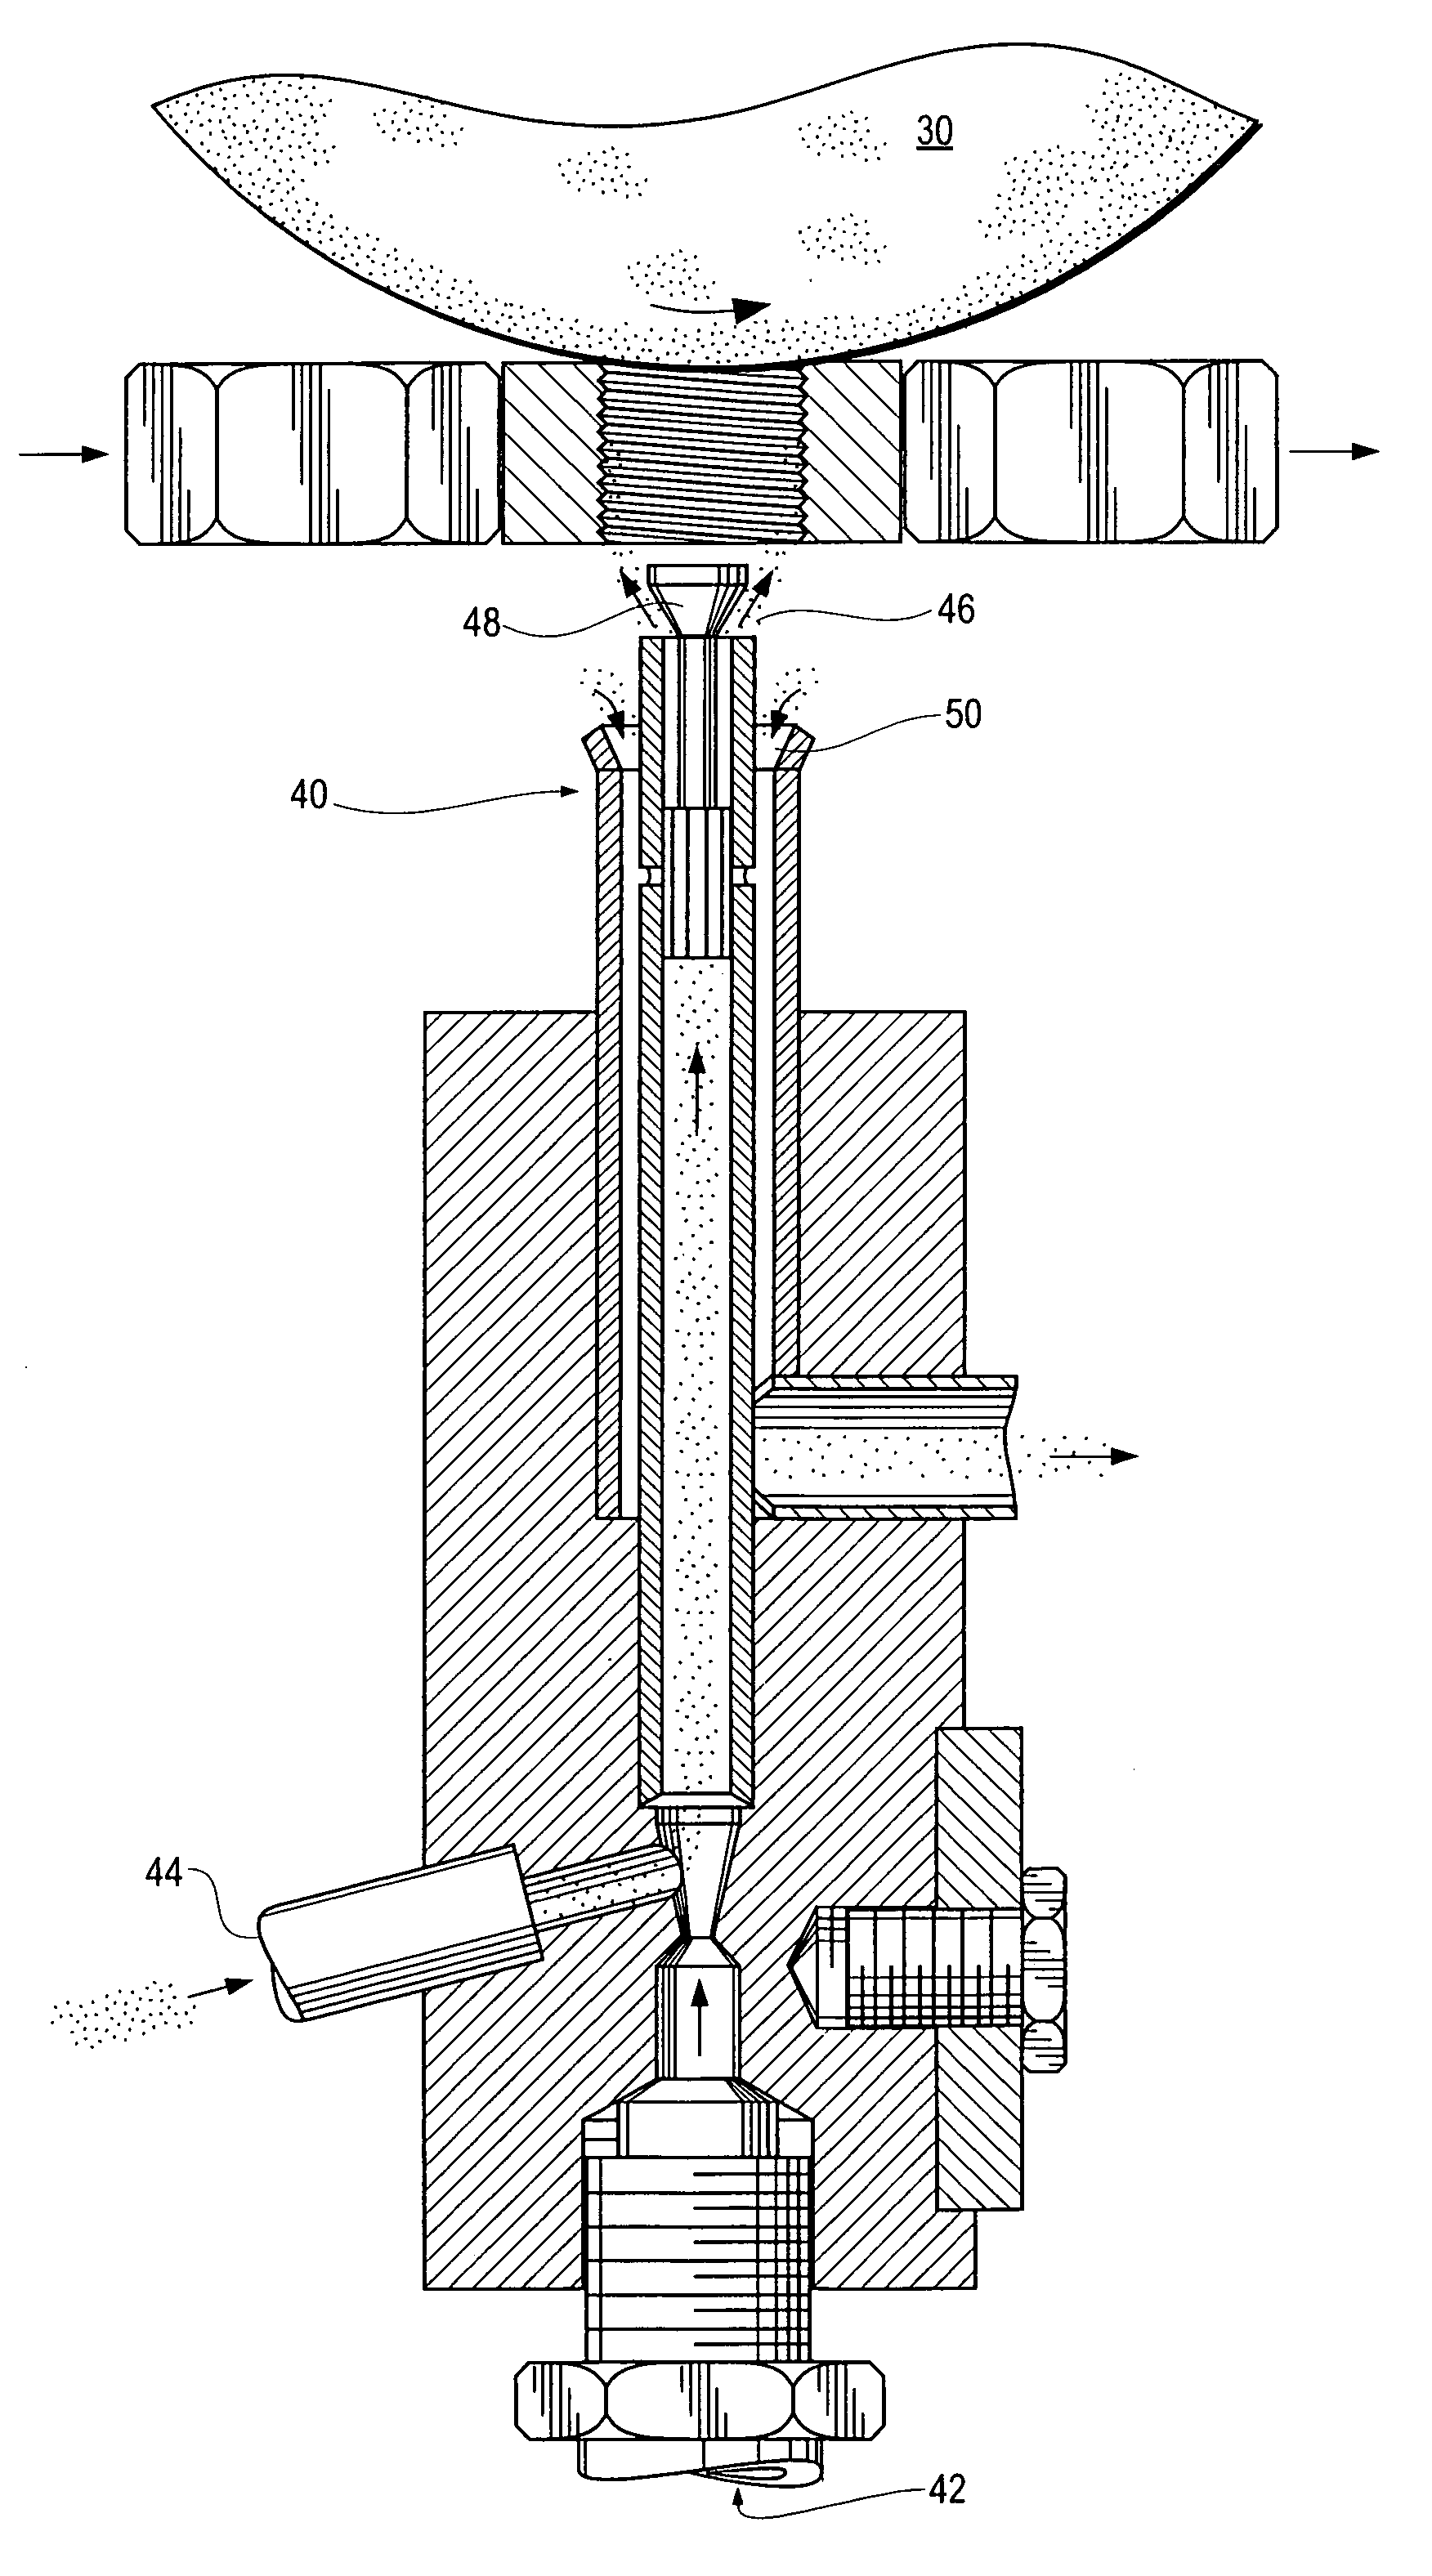 Process and apparatus for the application of fluoropolymer coating to threaded fasteners